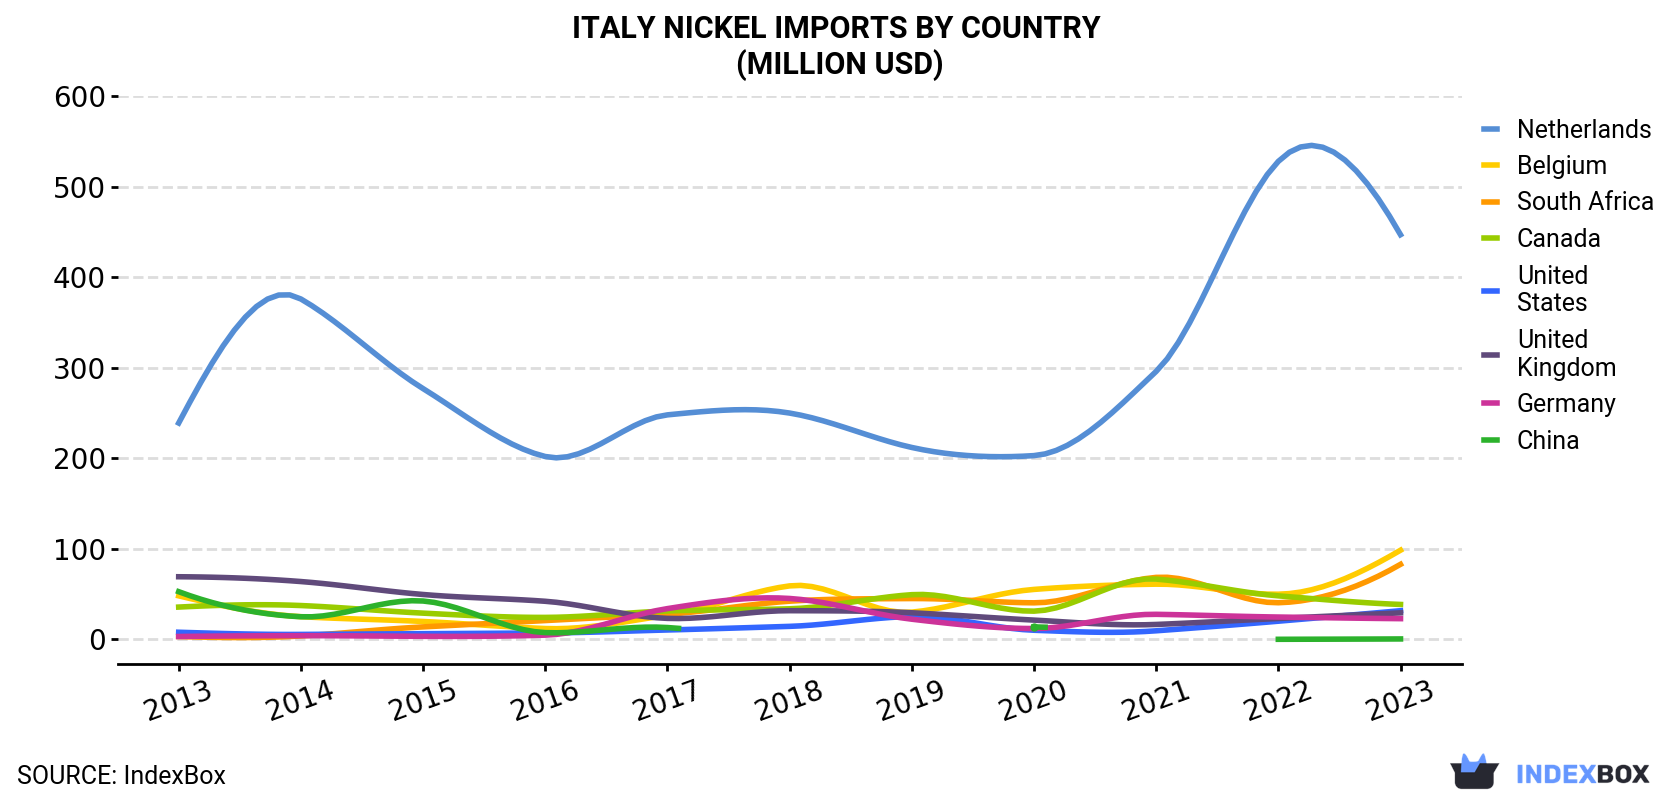 Italy Nickel Imports By Country (Million USD)